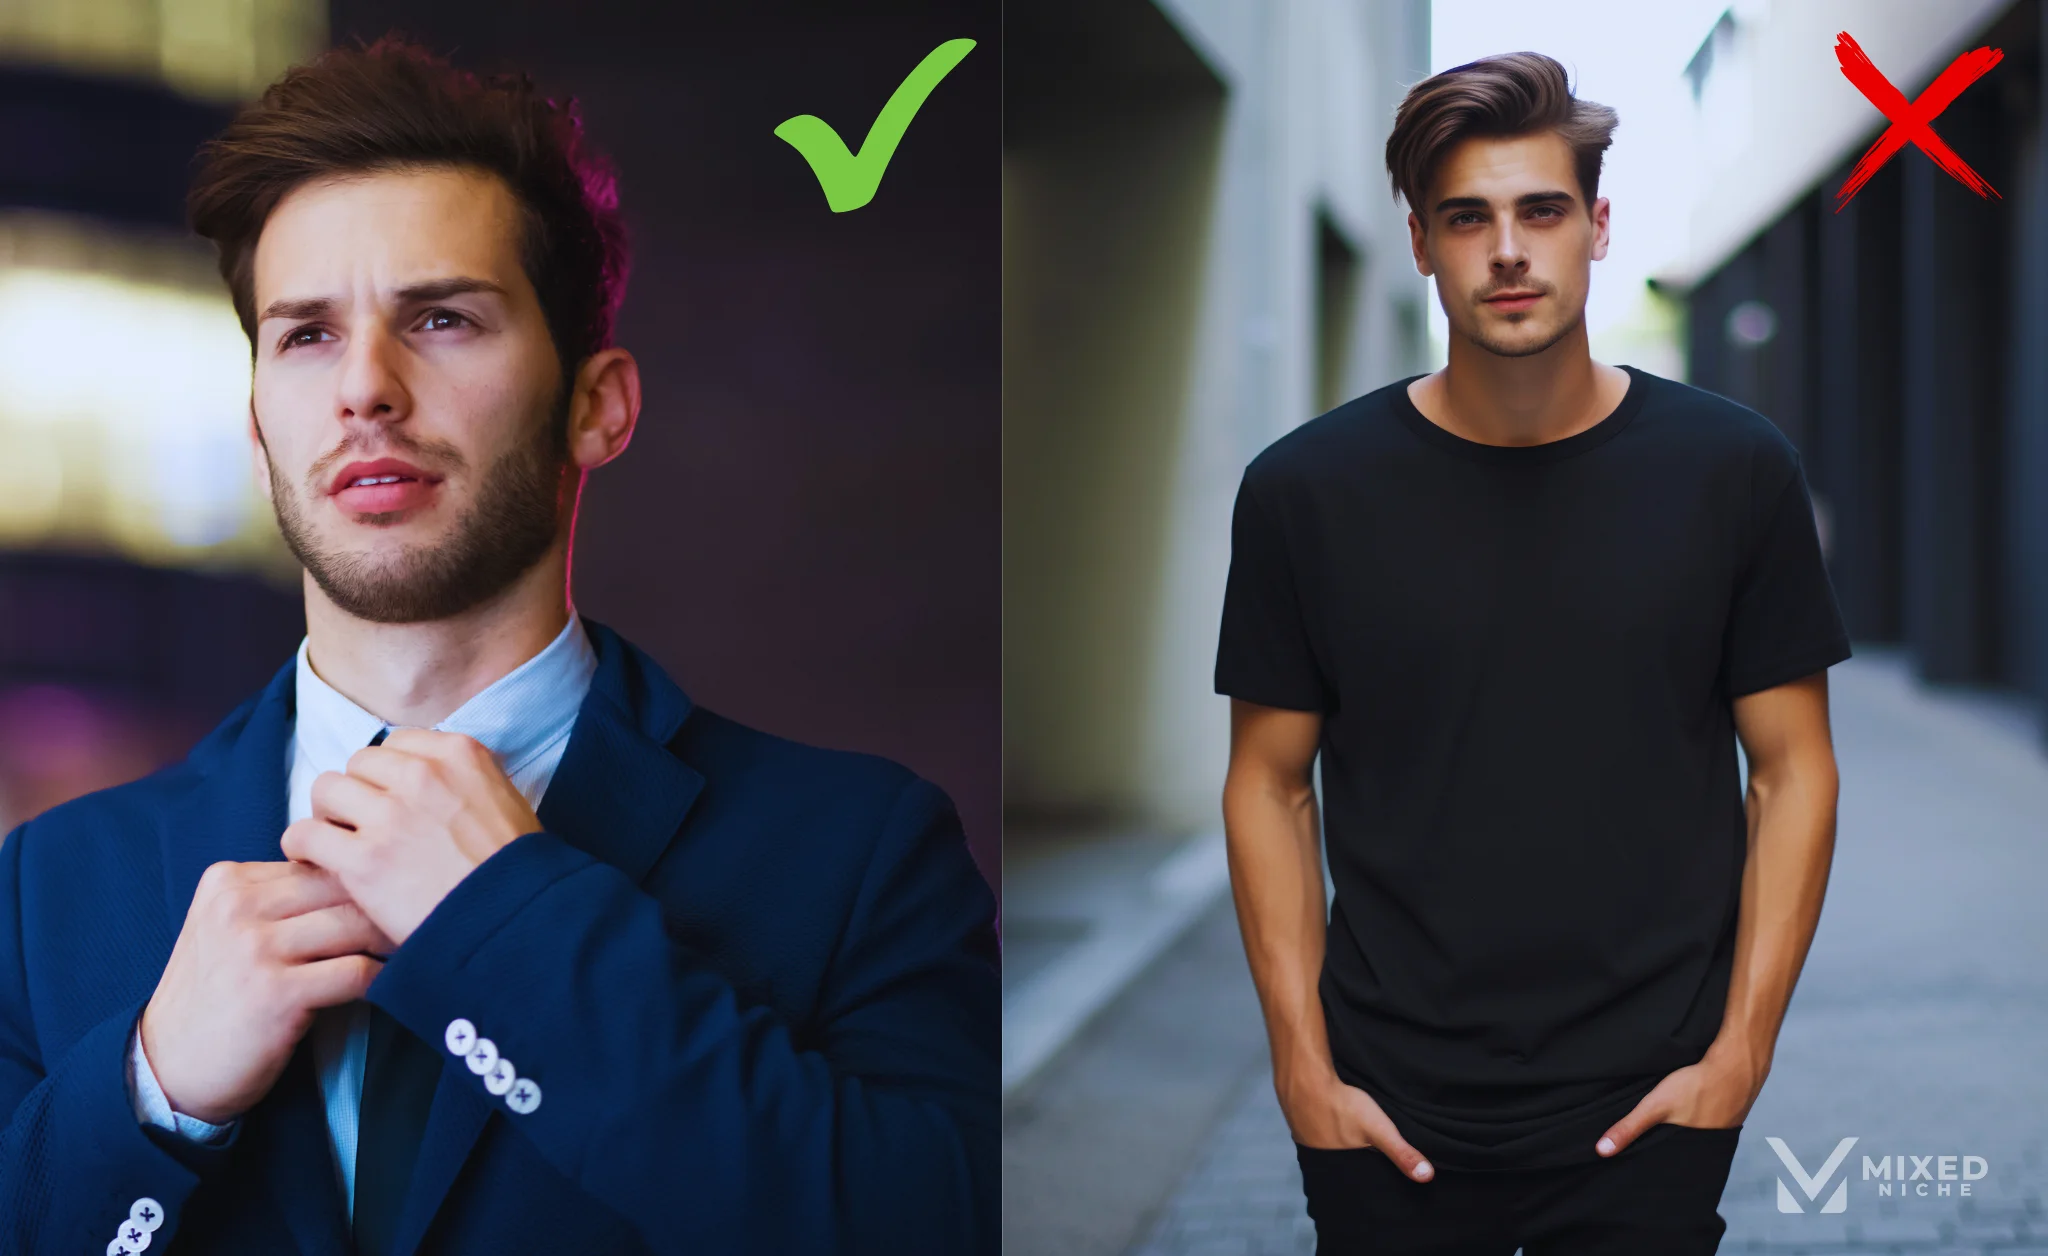 Be Like from Specific Industry - Good vs Bad Headshot Example